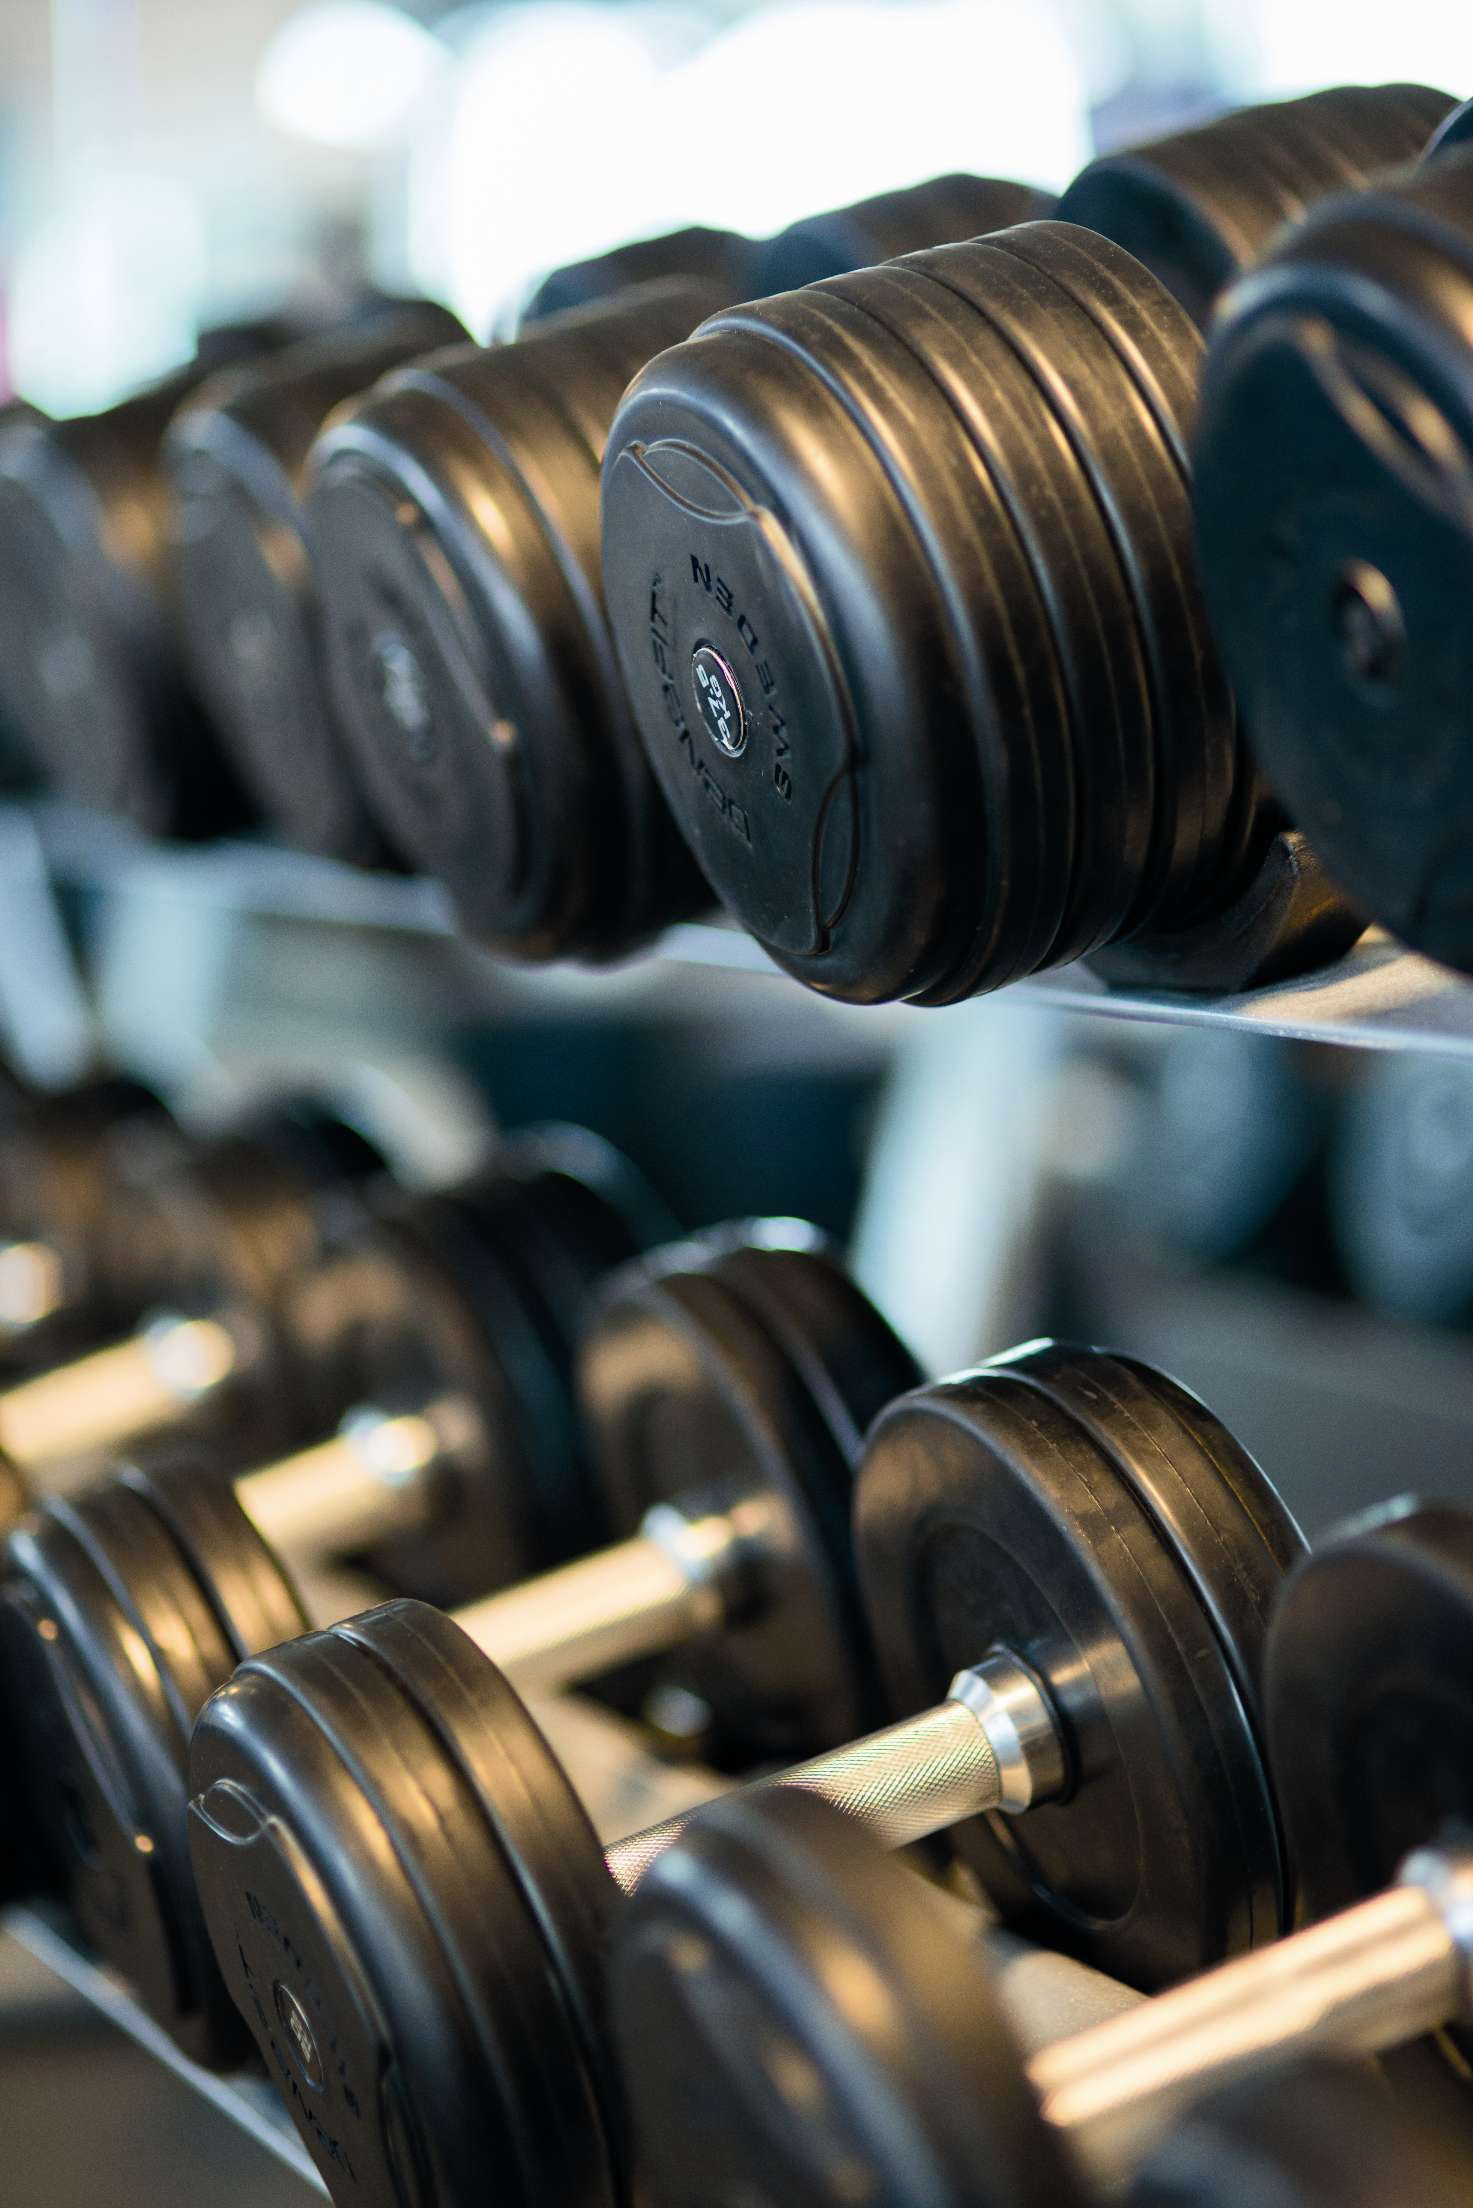 Weights on a rack image - Free stock photo - Public Domain ...